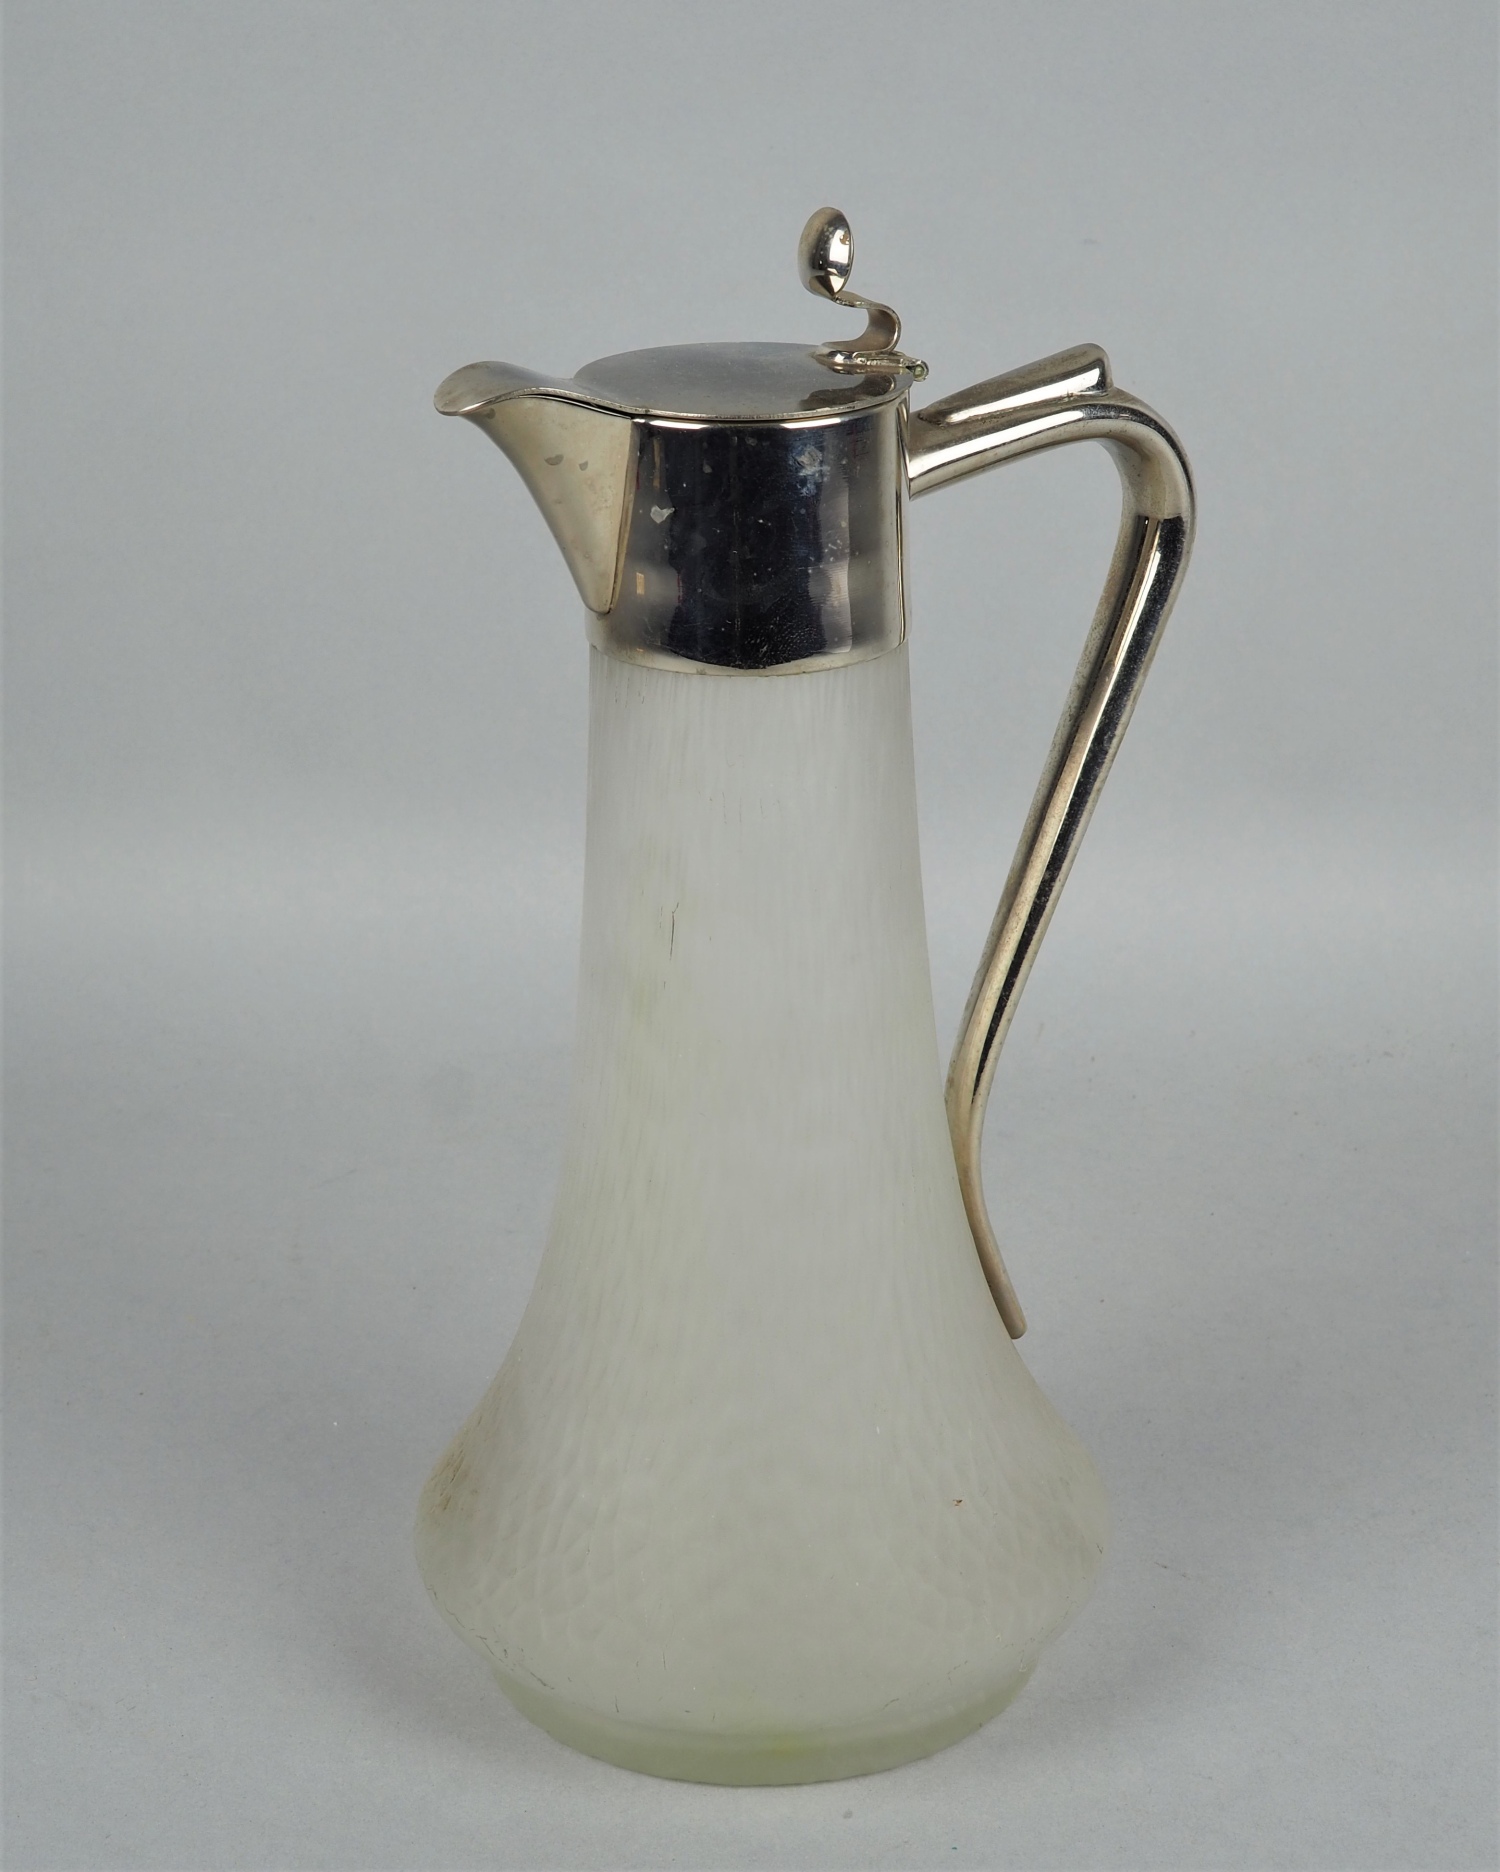 Glass carafe with metal mount, early 20th century.